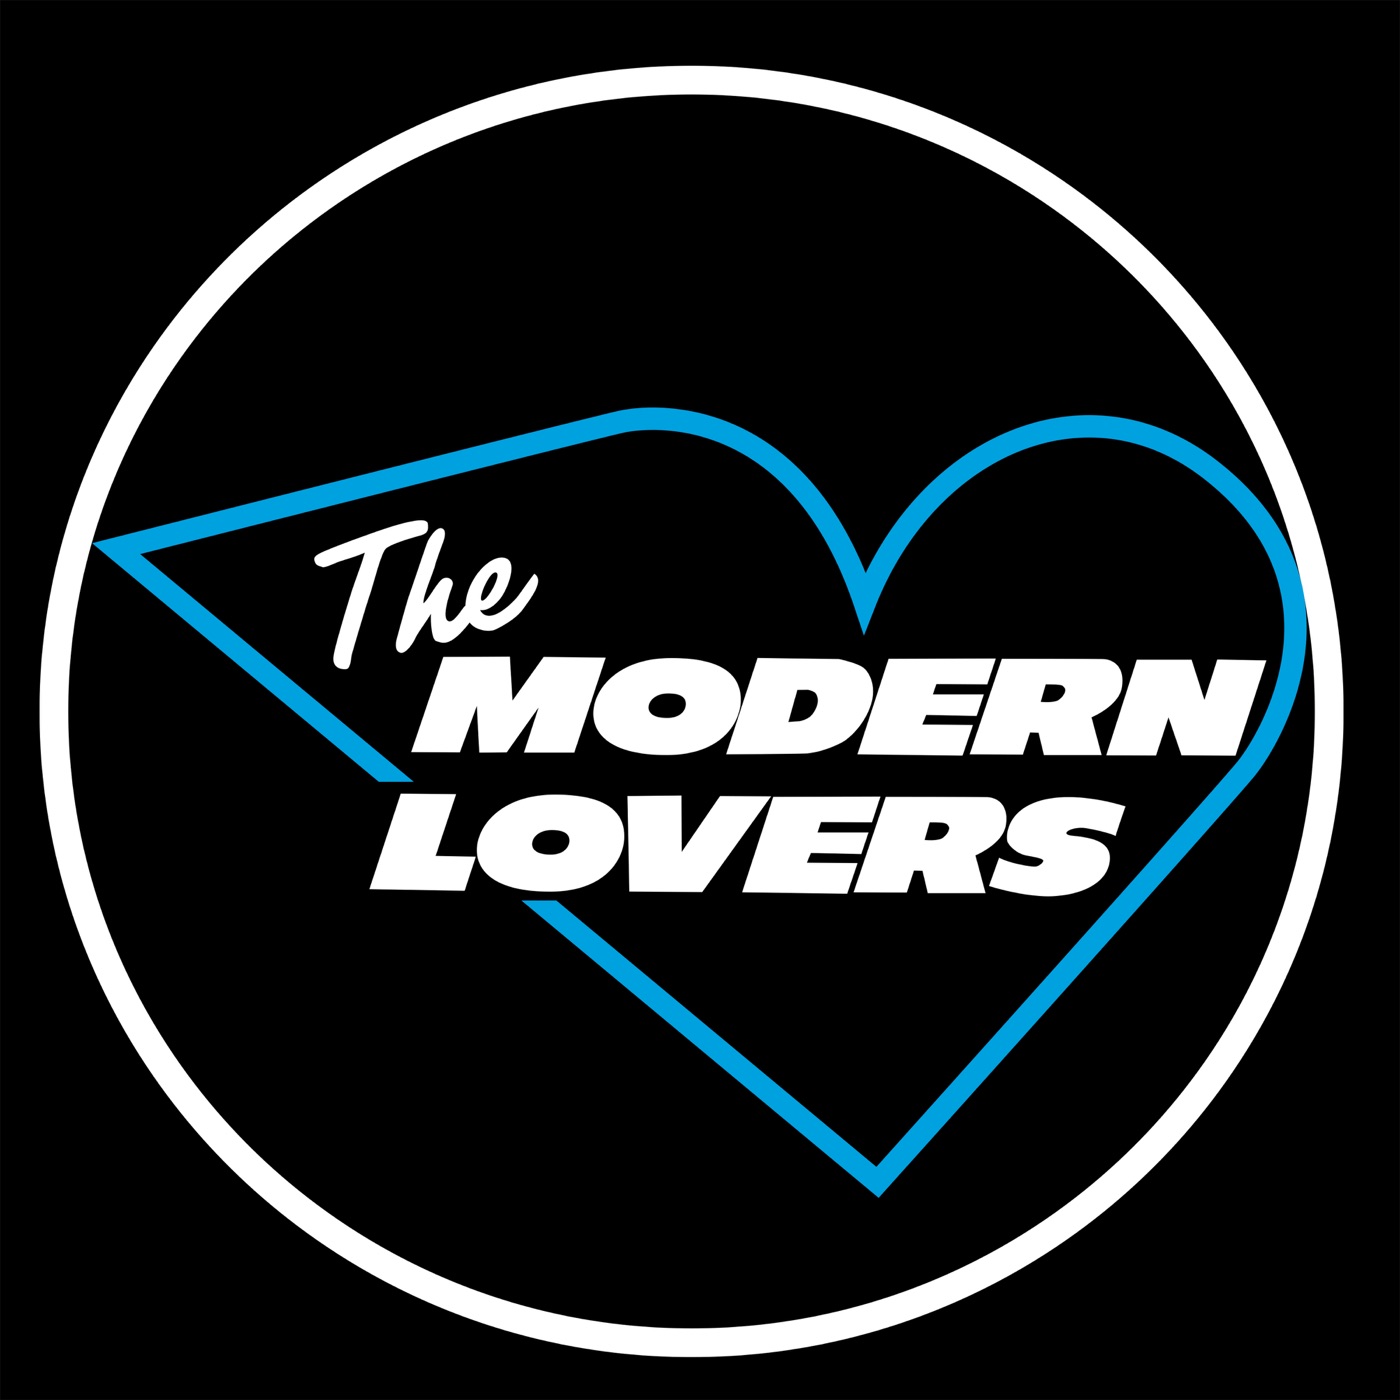 The Modern Lovers by The Modern Lovers